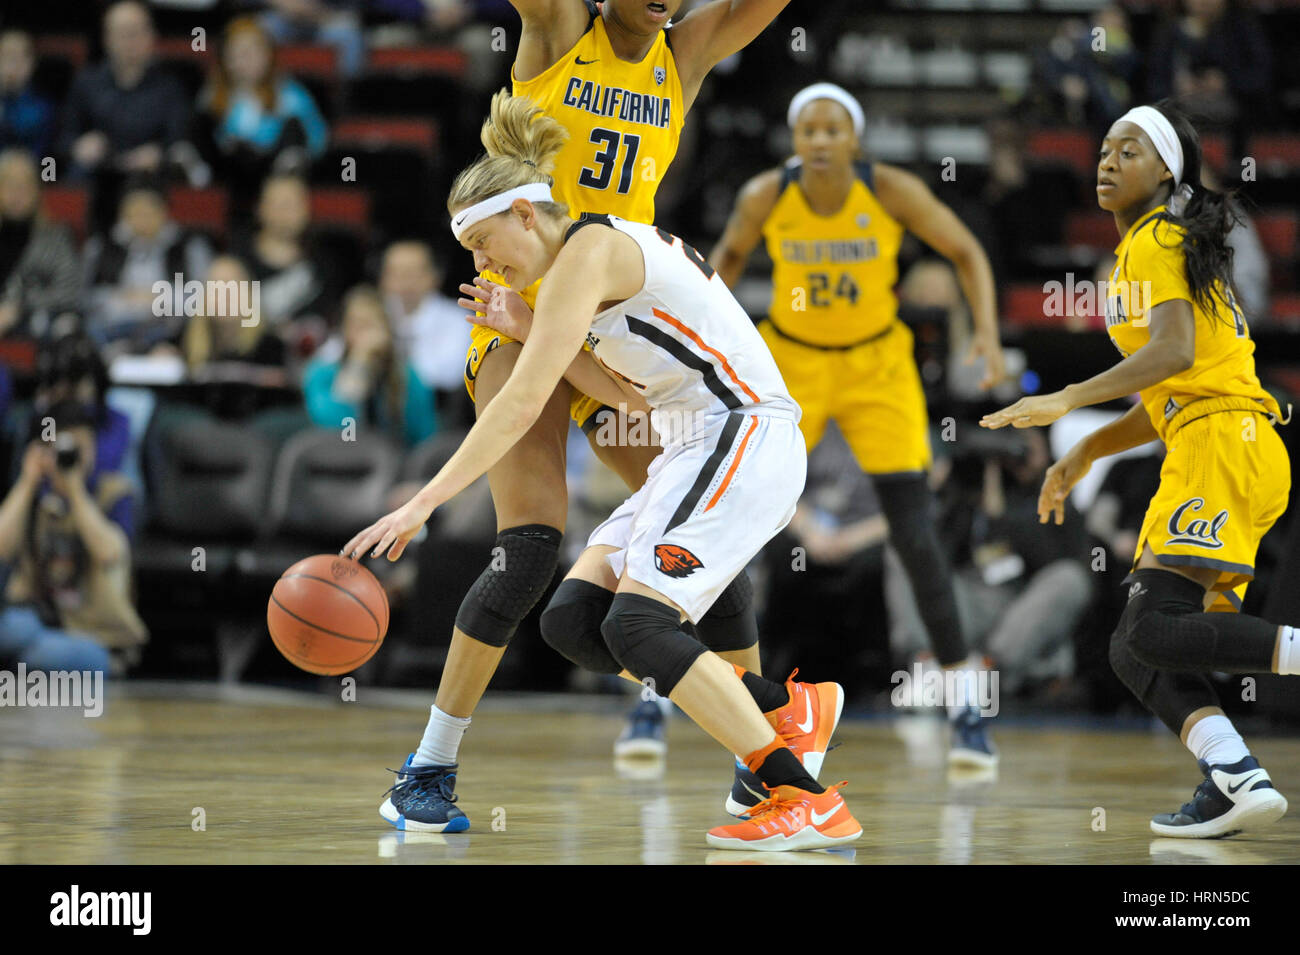 Seattle, WA, USA. 3rd Mar, 2017. OSU's point guard Sydney Wiese (24) is defended by Cal's Kristine Anigwe (31) during a PAC12 women's tournament game between the Oregon State Beavers and the Cal Bears. The game was played at Key Arena in Seattle, WA. Jeff Halstead/CSM/Alamy Live News Stock Photo